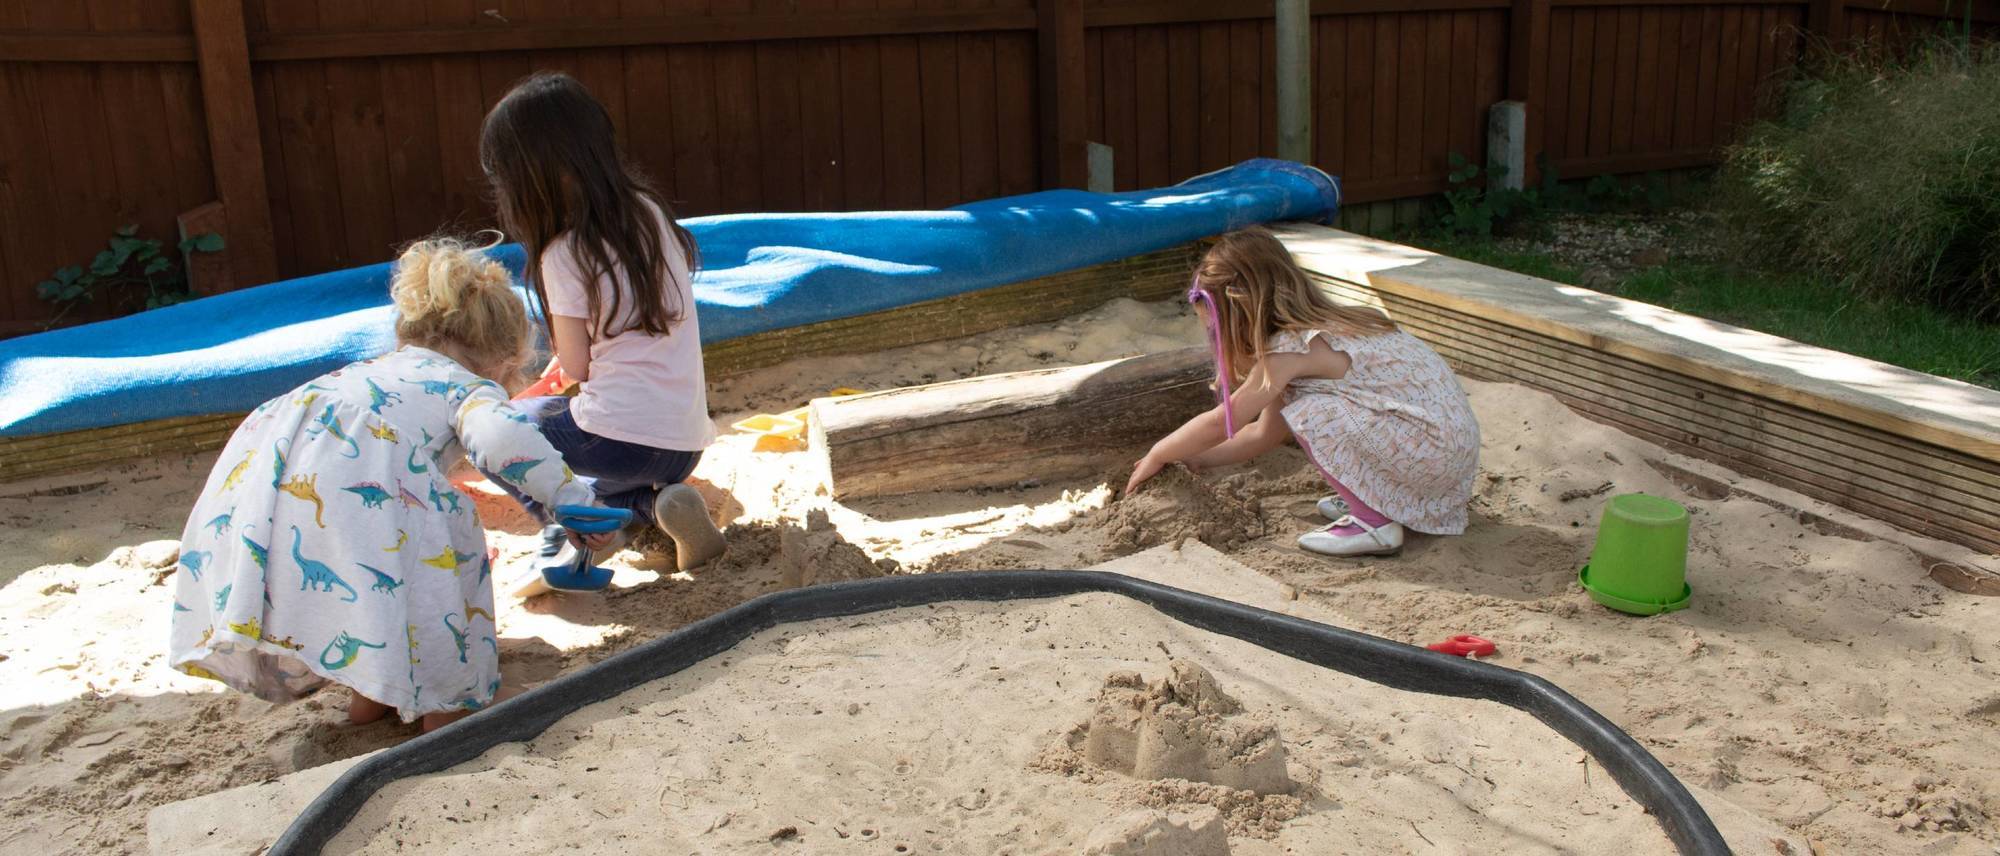 girls-playing-in-sandpit-on-sunny-day